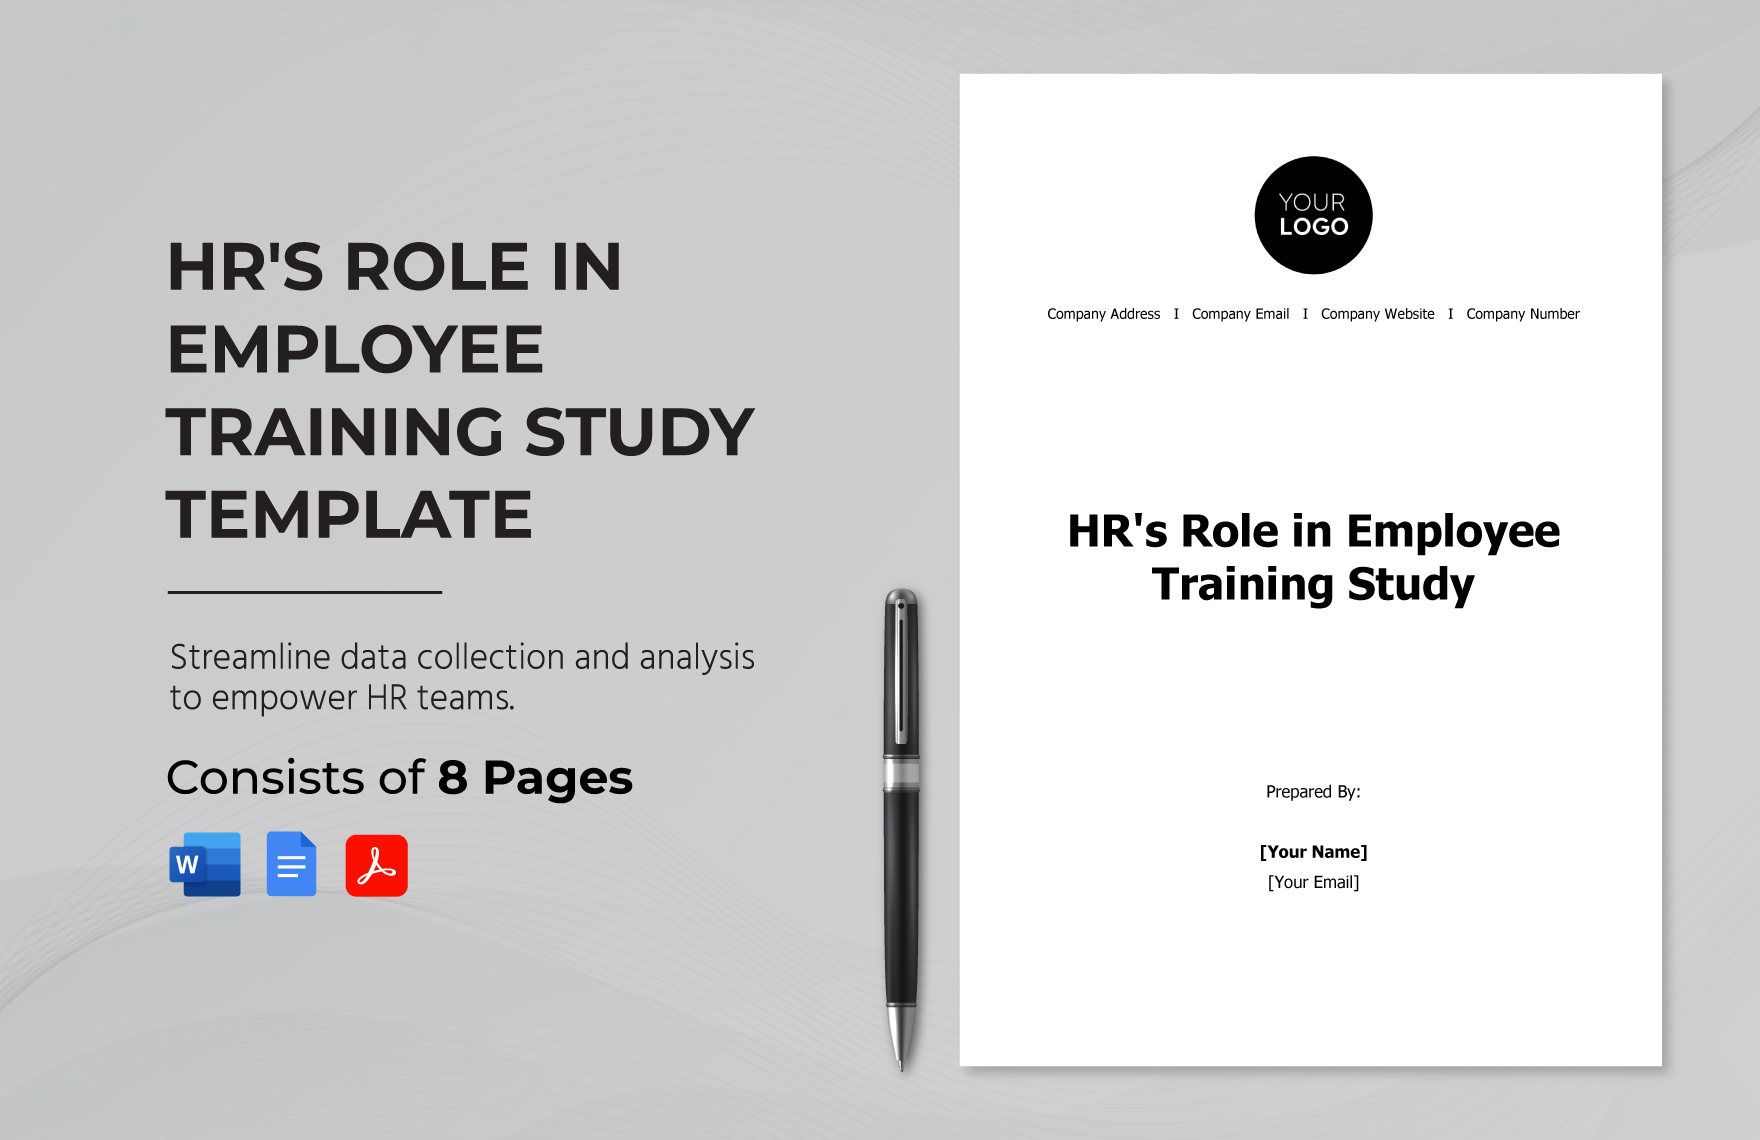 HR's Role in Employee Training Study Template